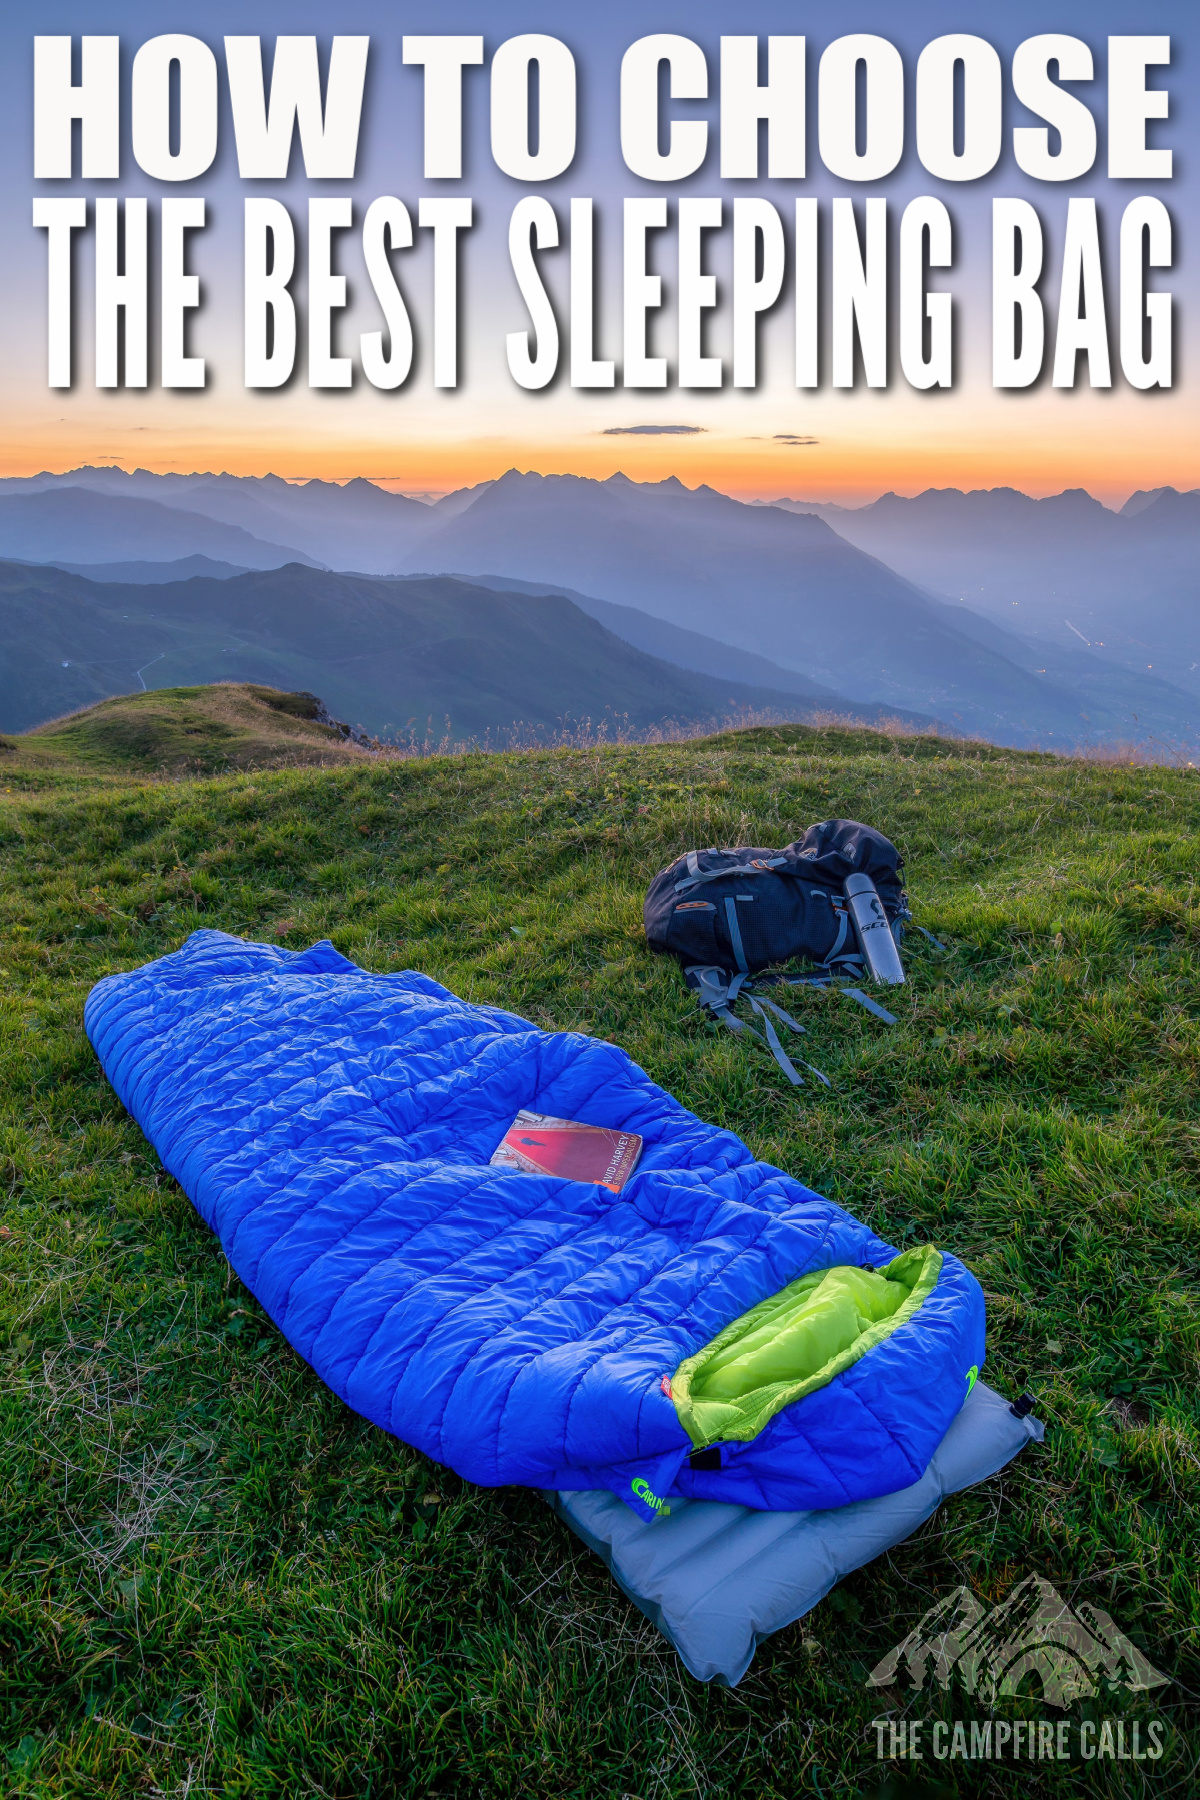 How to Choose the Best Sleeping Bag